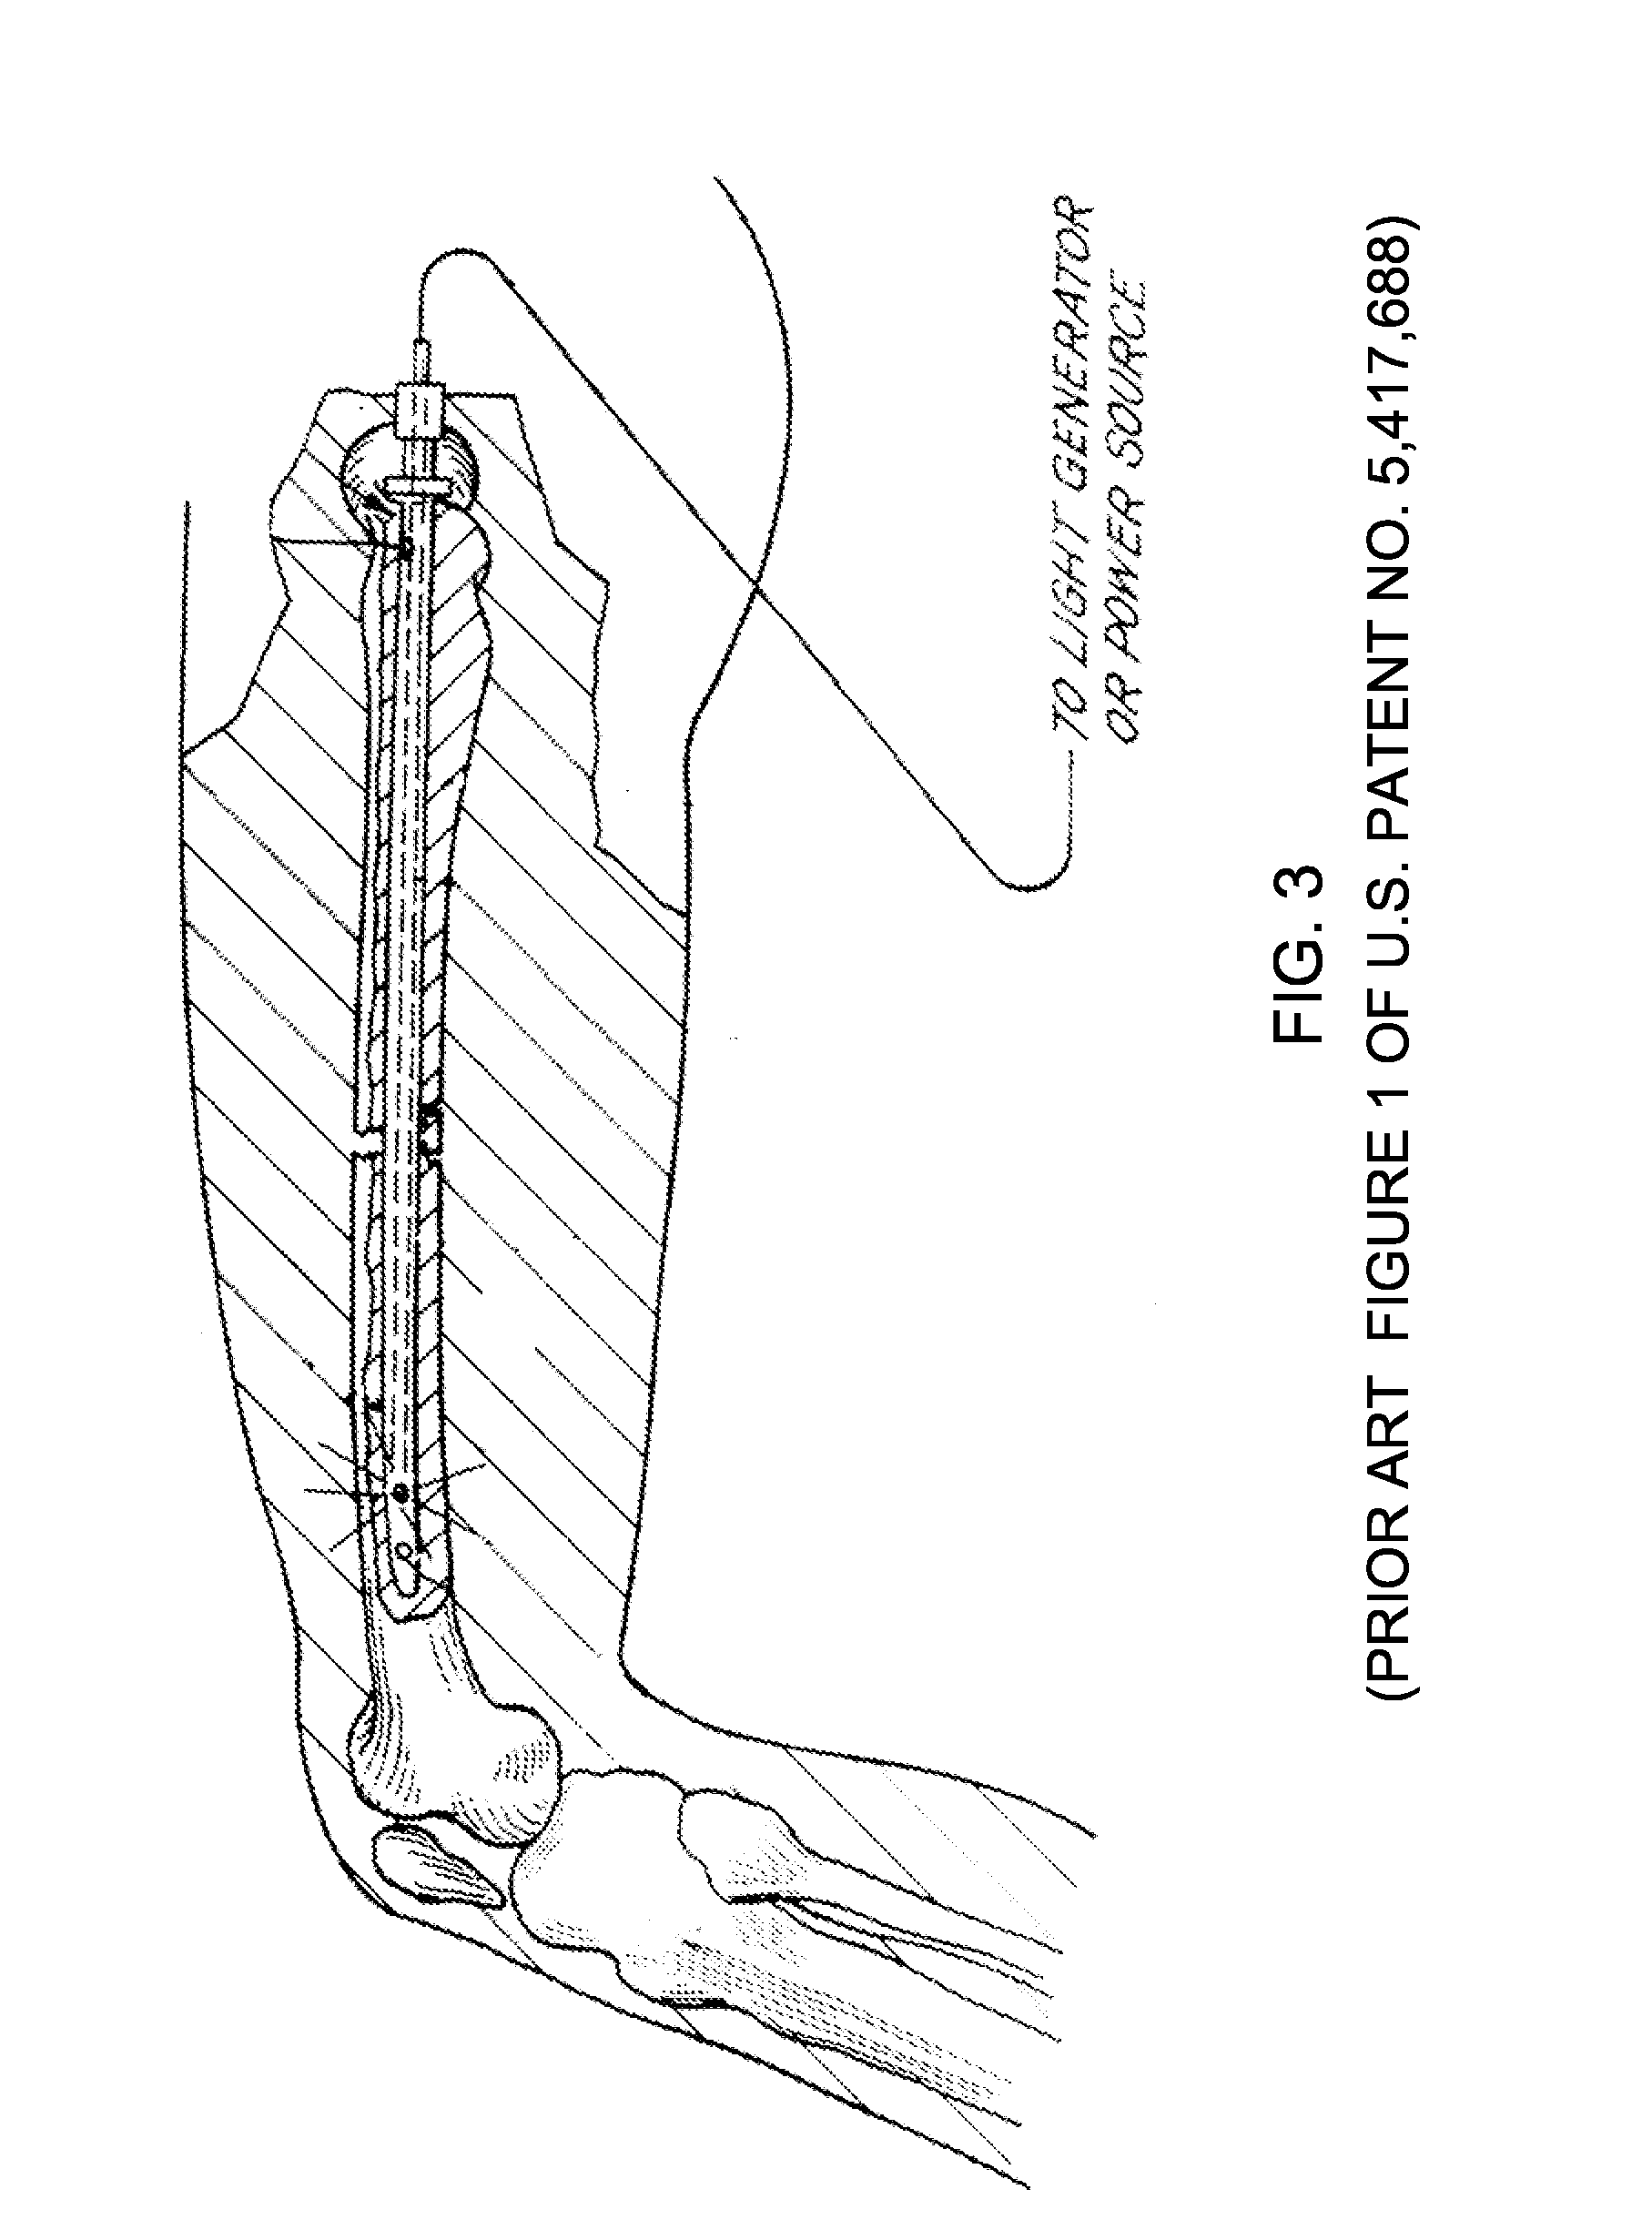 Intramedullary transillumination apparatus, surgical kit and method for accurate placement of locking screws in long bone intramedullary rodding